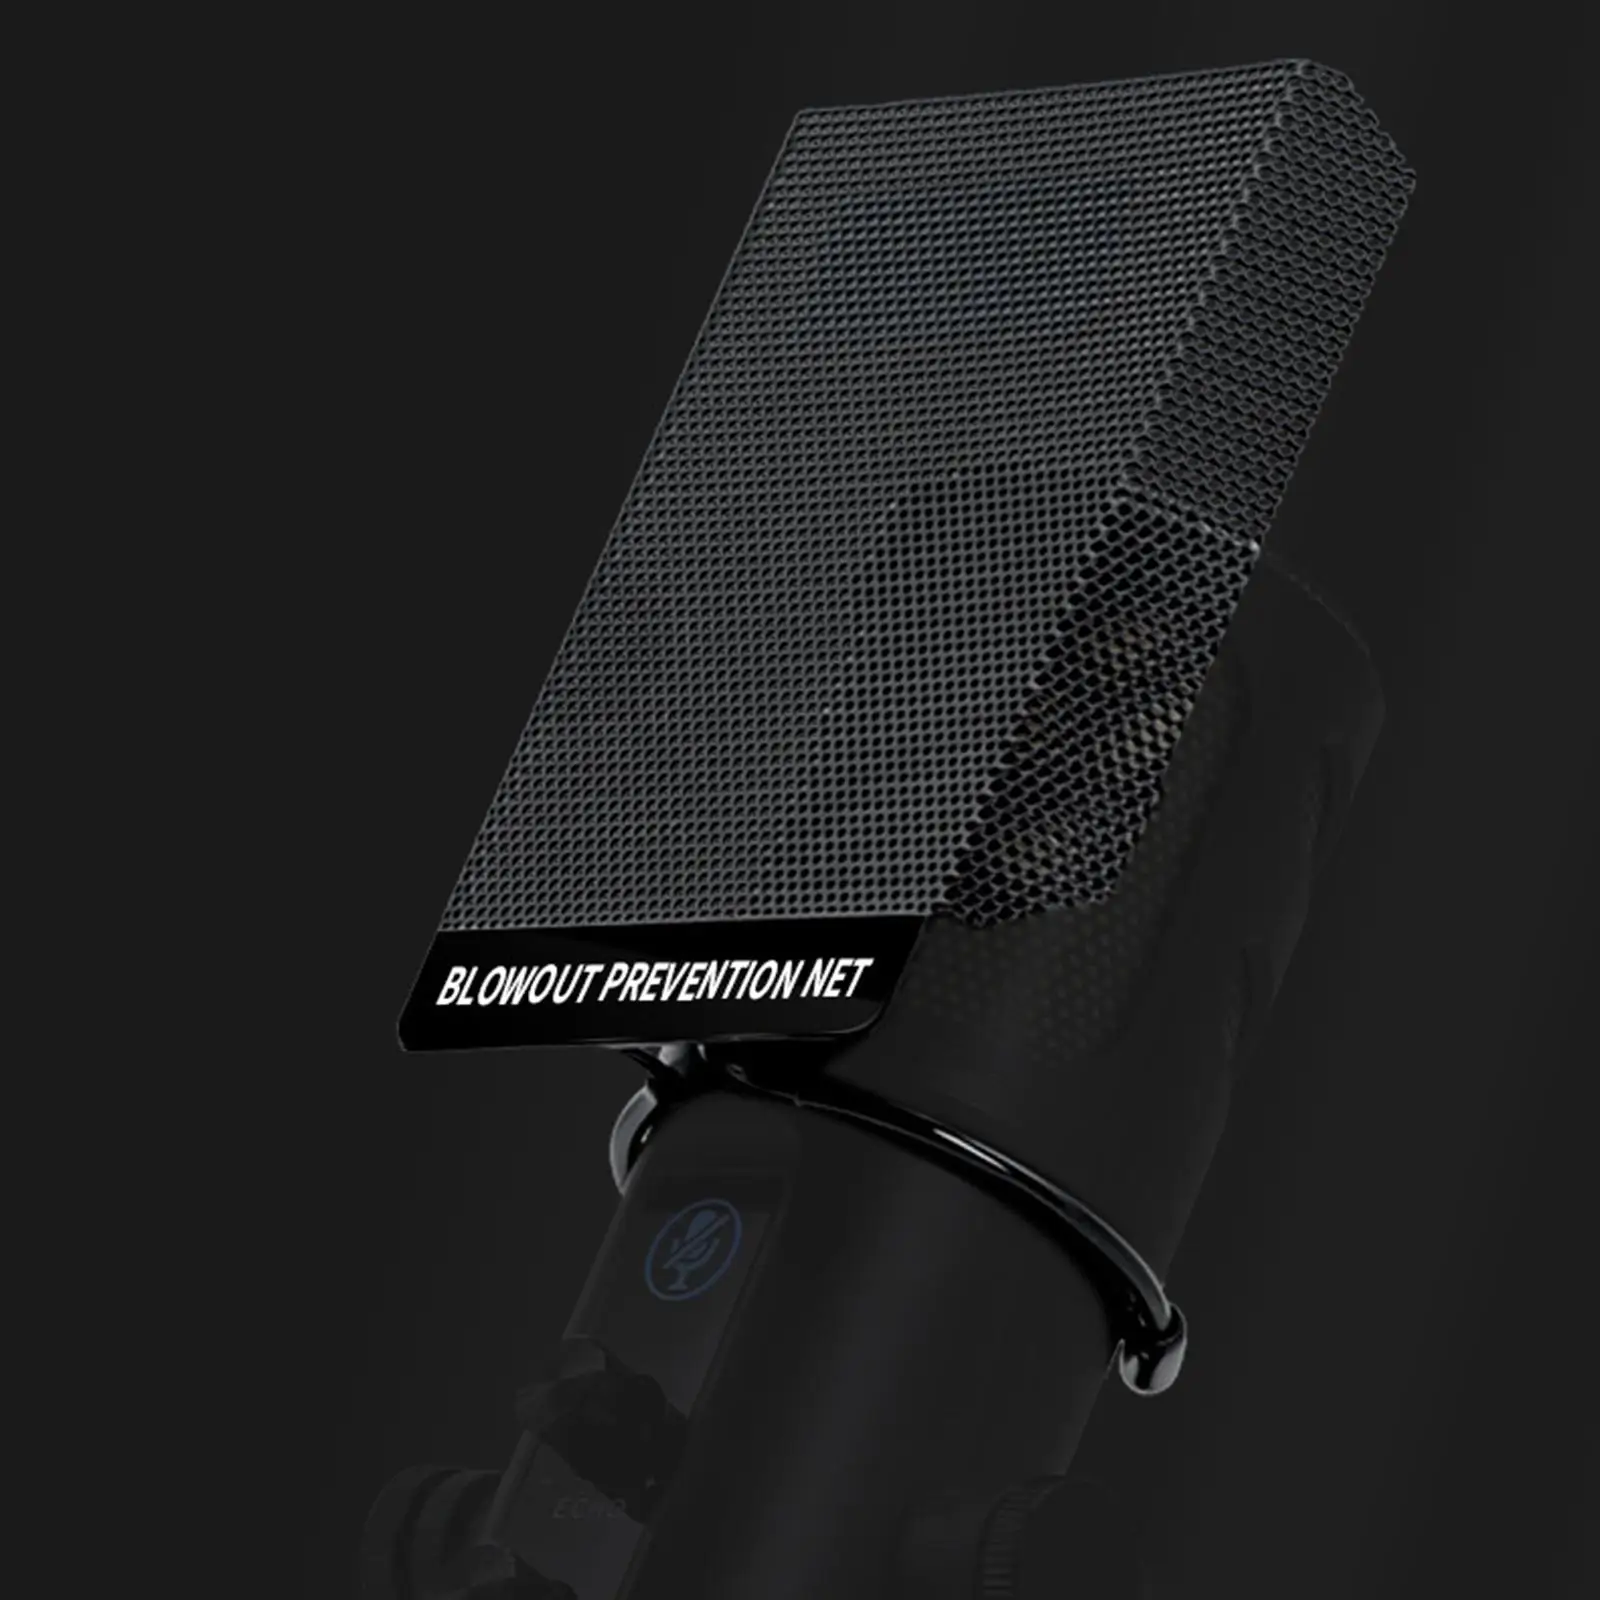 Microphone Isolation Shield Metal Mesh Blowout Preventer Net Mic Pop Filter for Vocal Recording Videos Live Broadcasting Studio